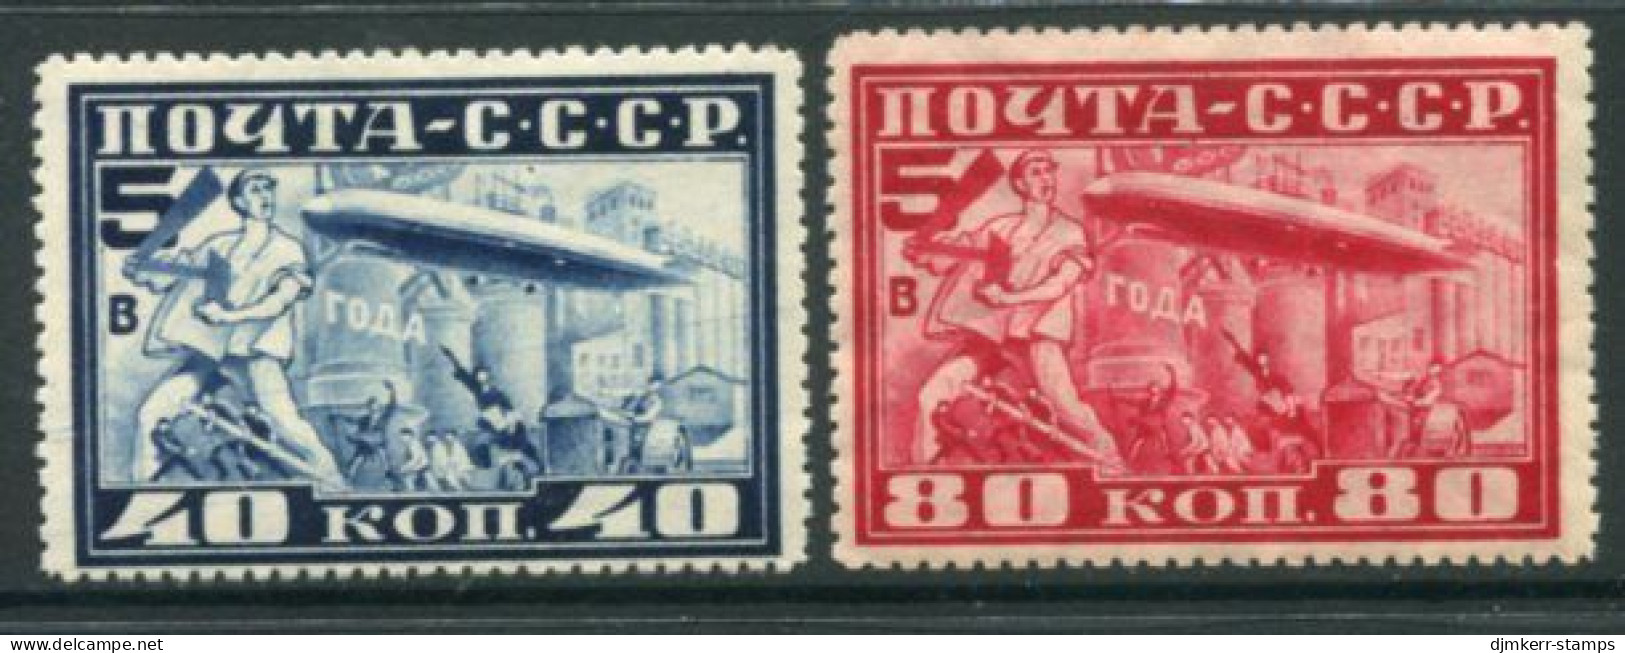 SOVIET UNION 1930 Zeppelin Visit Perforated 10½ LHM / *.  Michel 390-91B - Unused Stamps